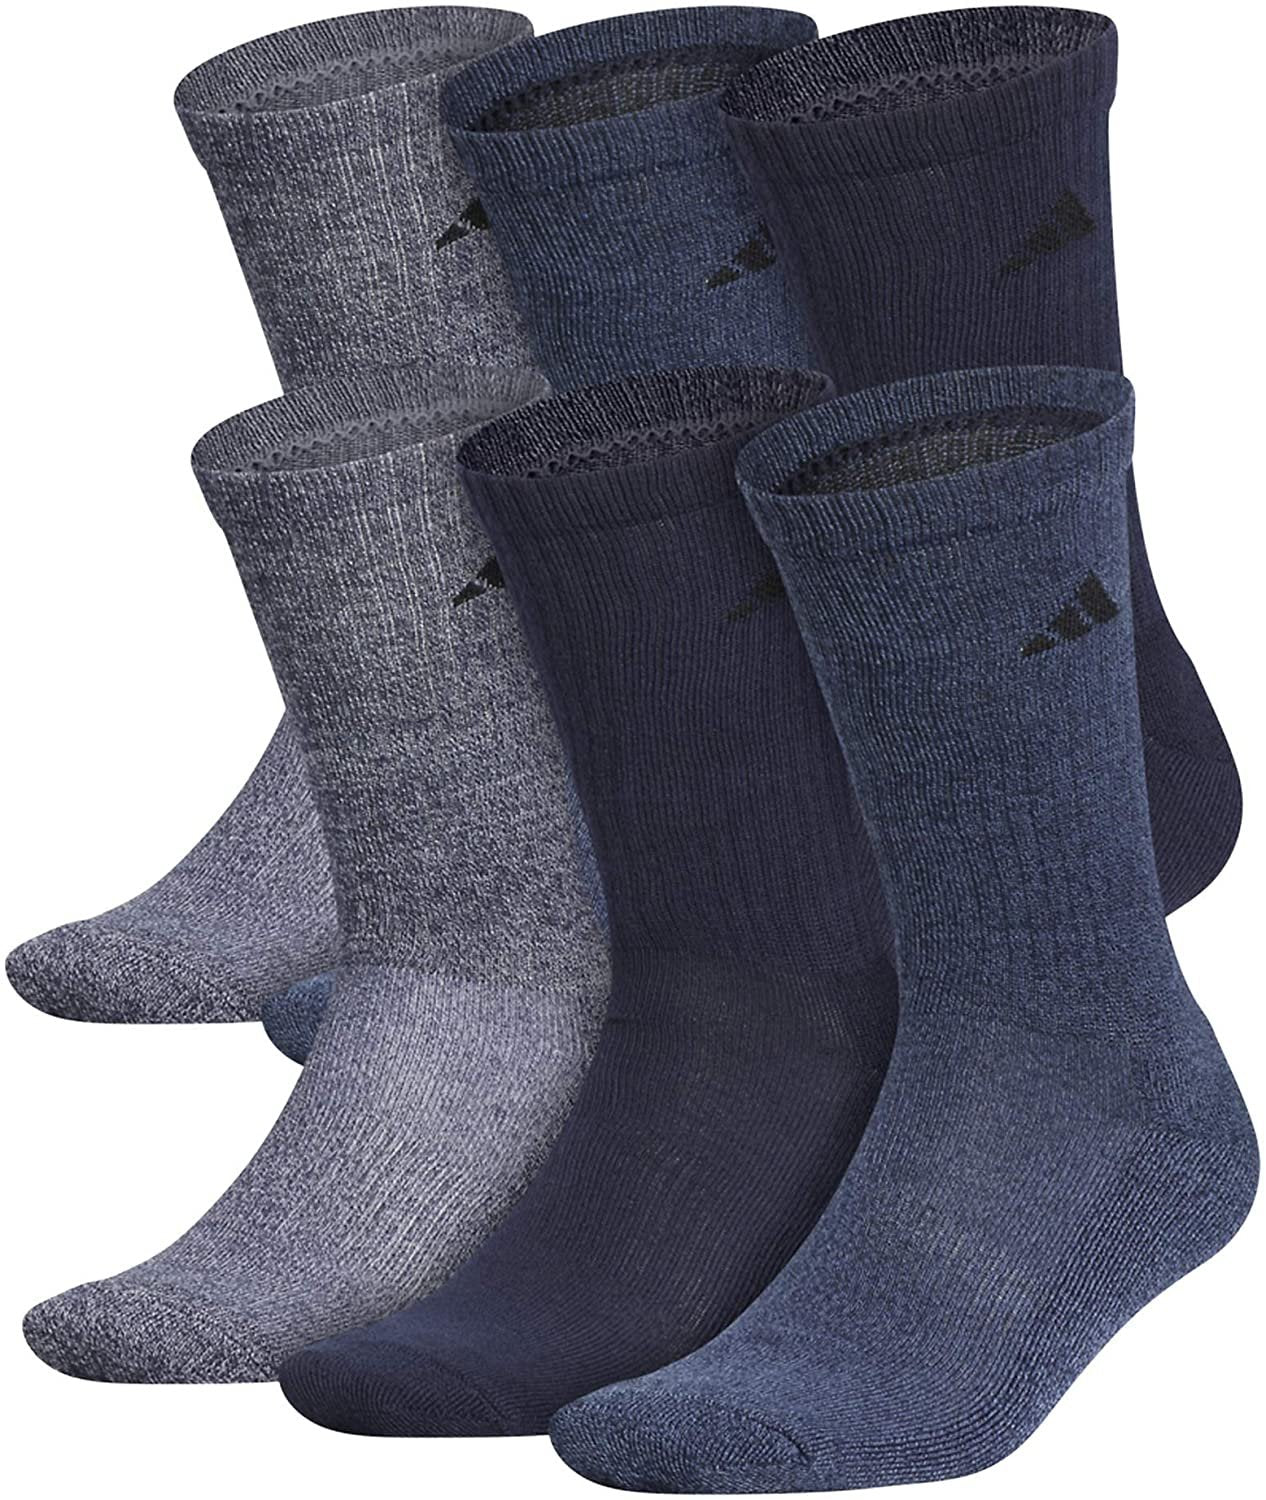 Adidas Athletic Cushioned Legend Ink Blue/Tech Ink Gray Marl Men's Crew Socks (6 Pair) - Becauze